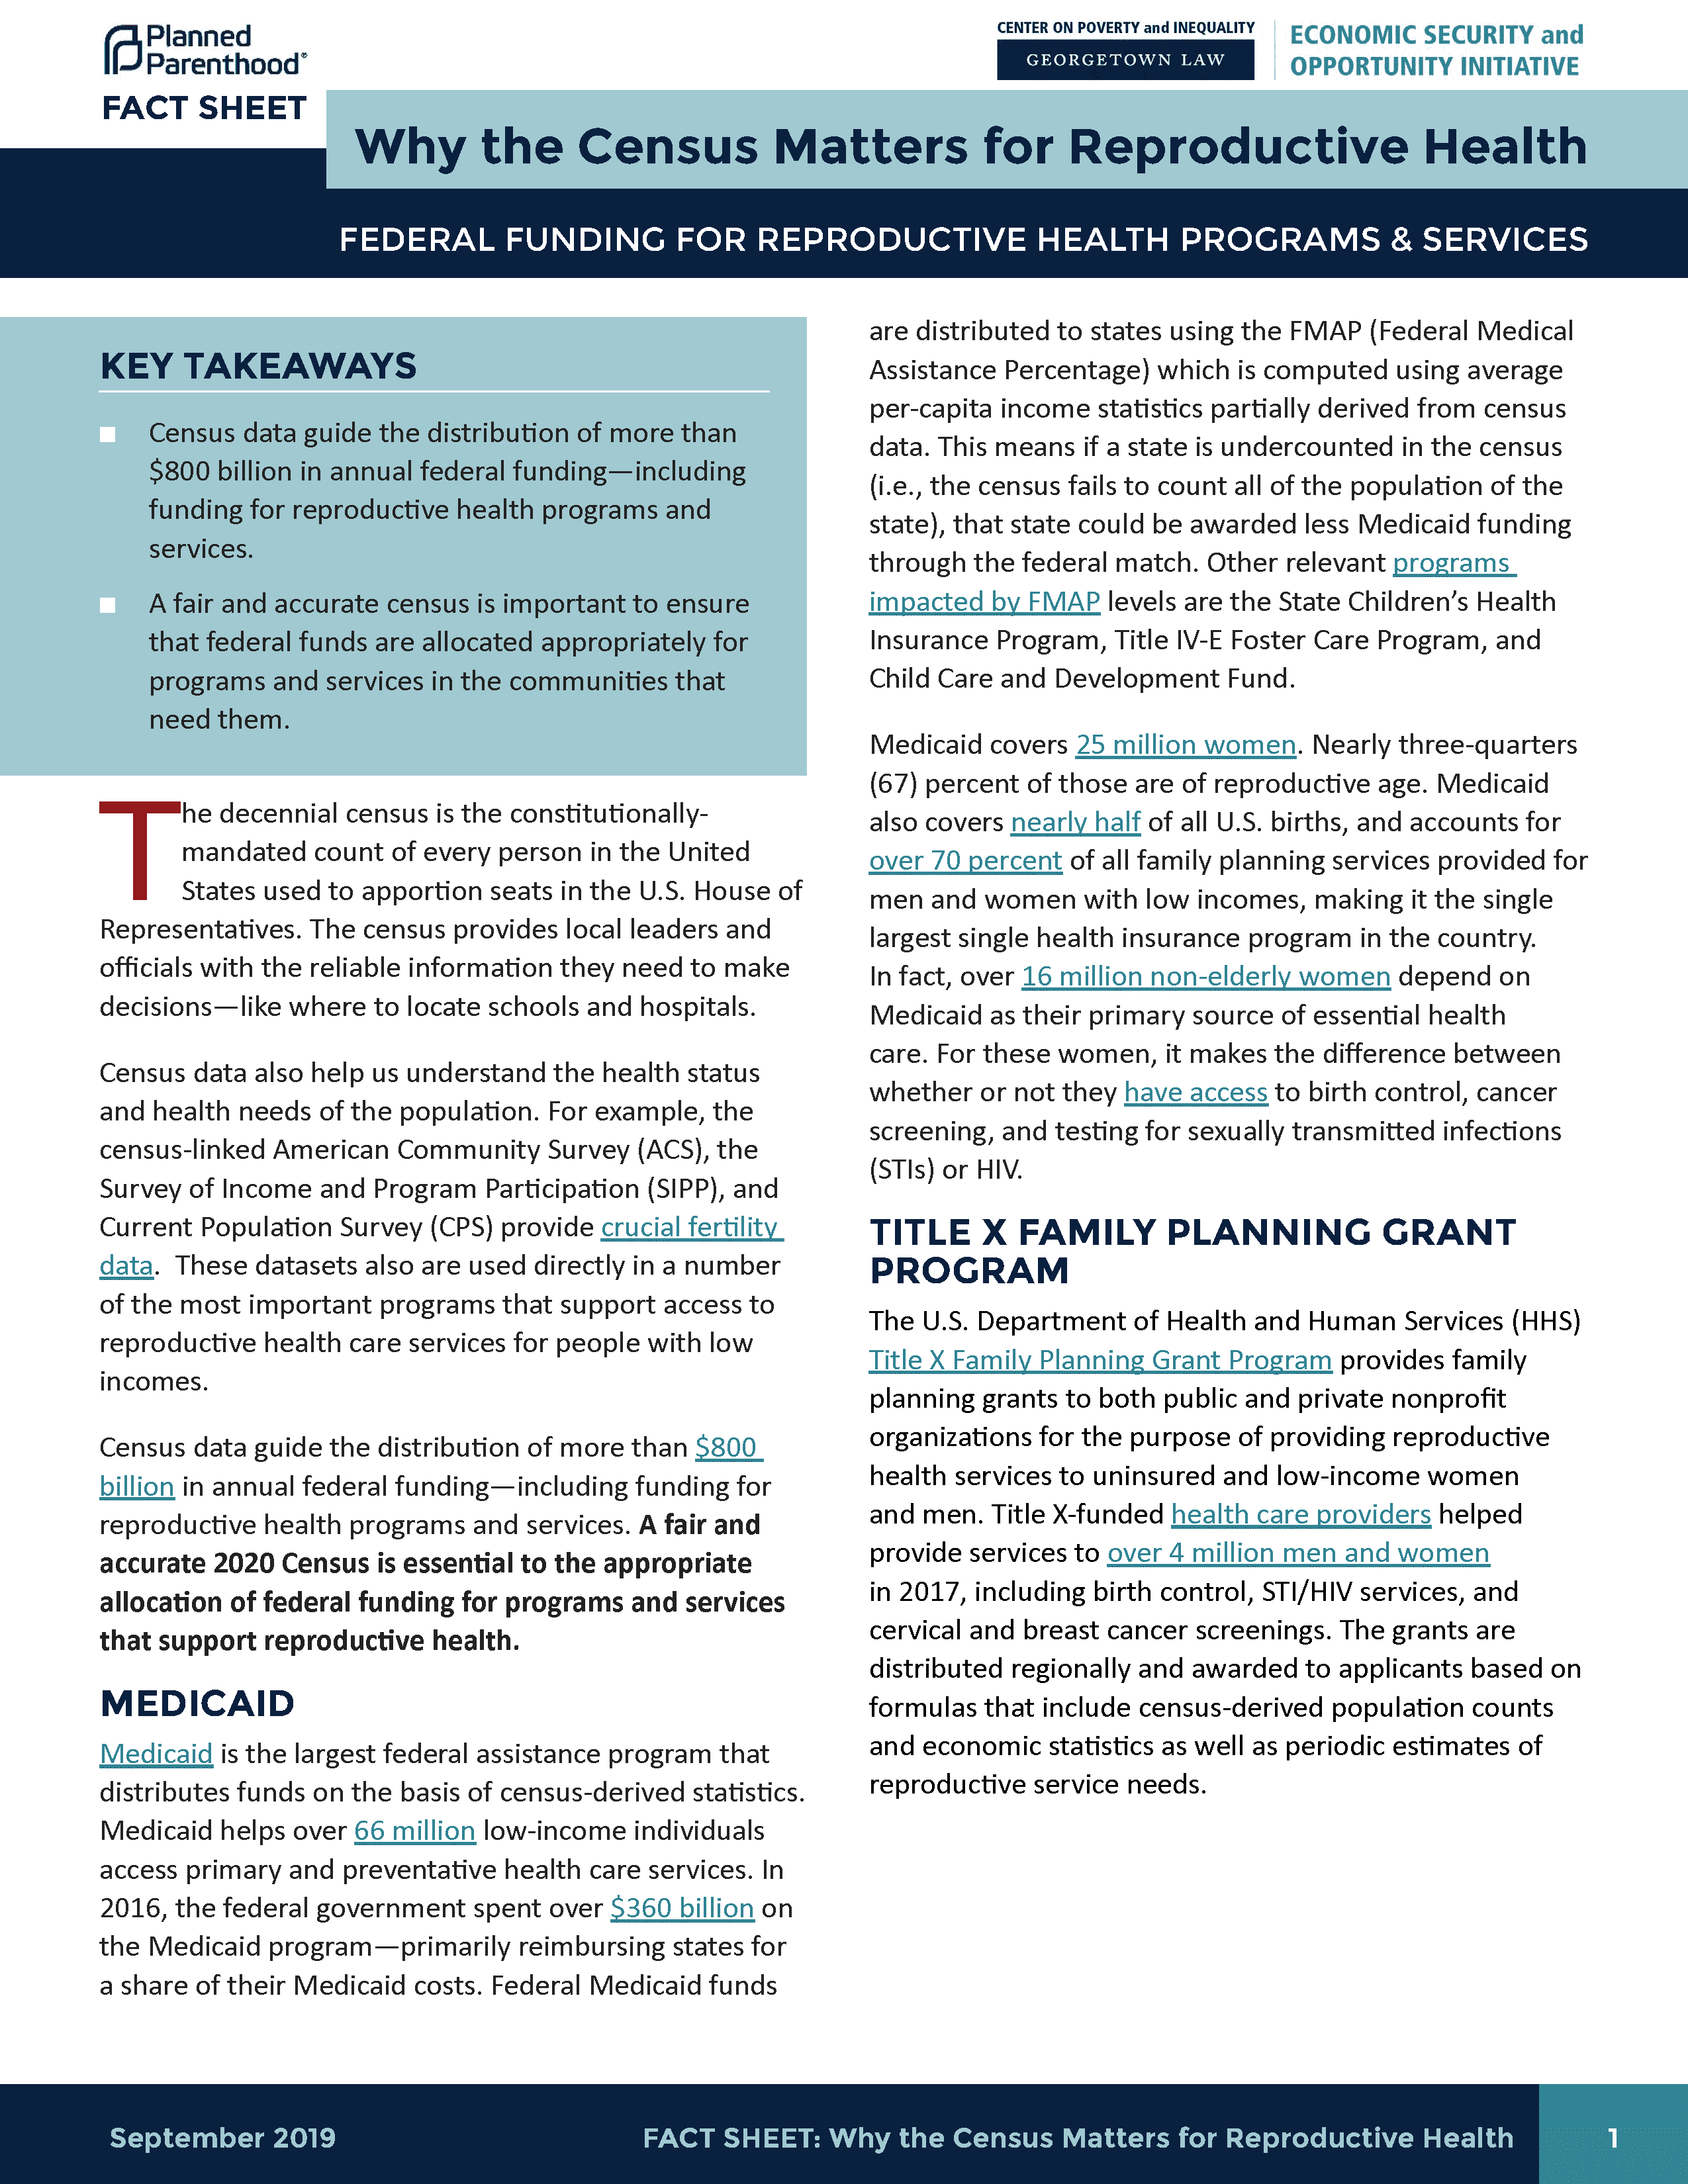 Cover of Census and Reproductive Health Fact Sheet